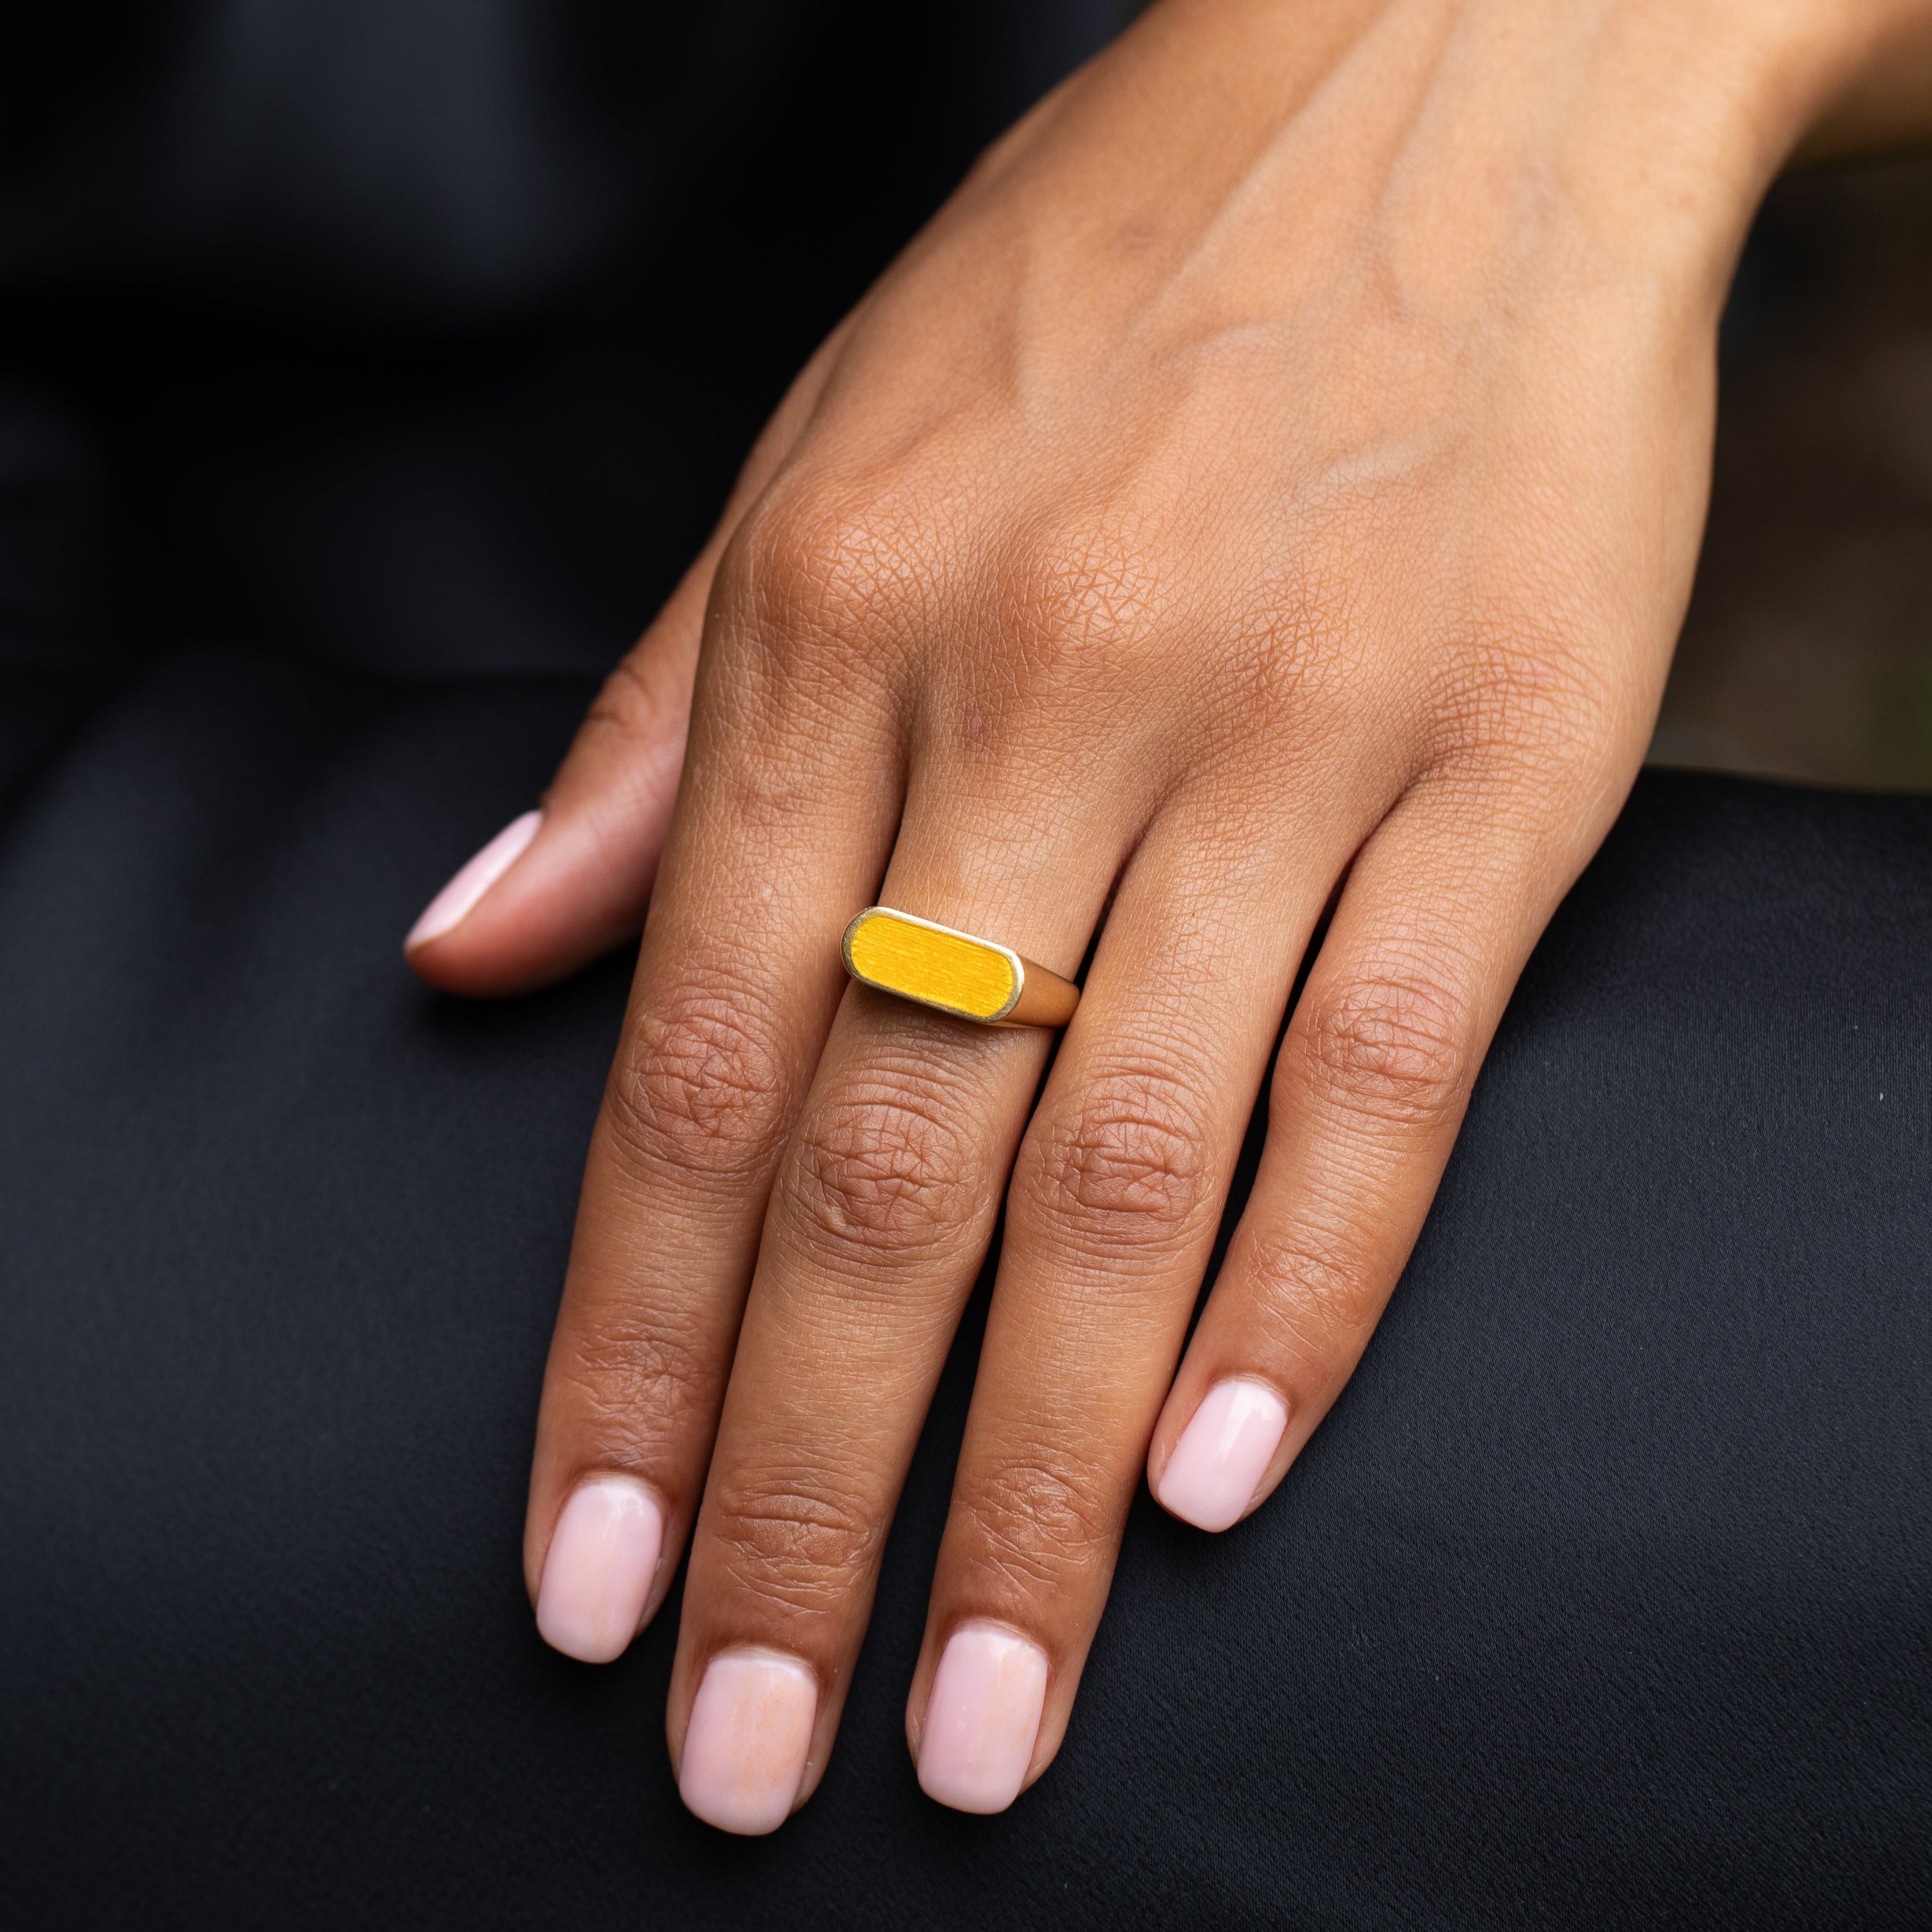 Yellow Enamel and 18K Gold Ring